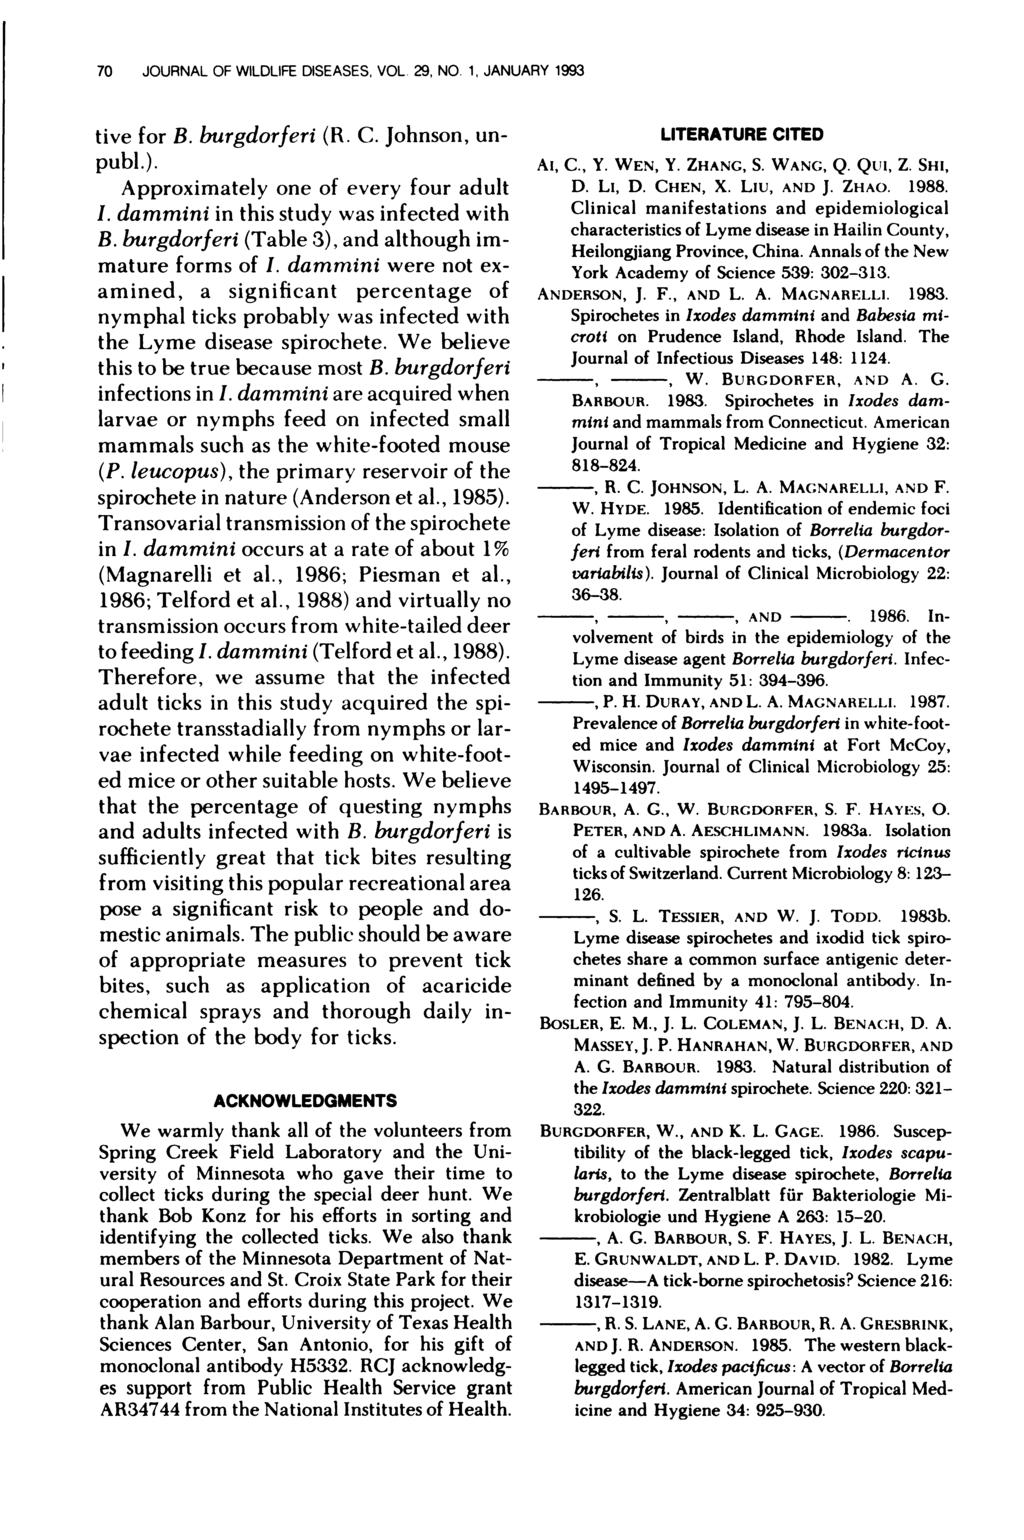 70 JOURNAL OF WILDLIFE DISEASES, VOL. 29, NO. 1, JANUARY 1993 tive for B. burgdorferi (R. C. Johnson, unpub!.). Approximately one of every four adult I. dammini in this study was infected with B.